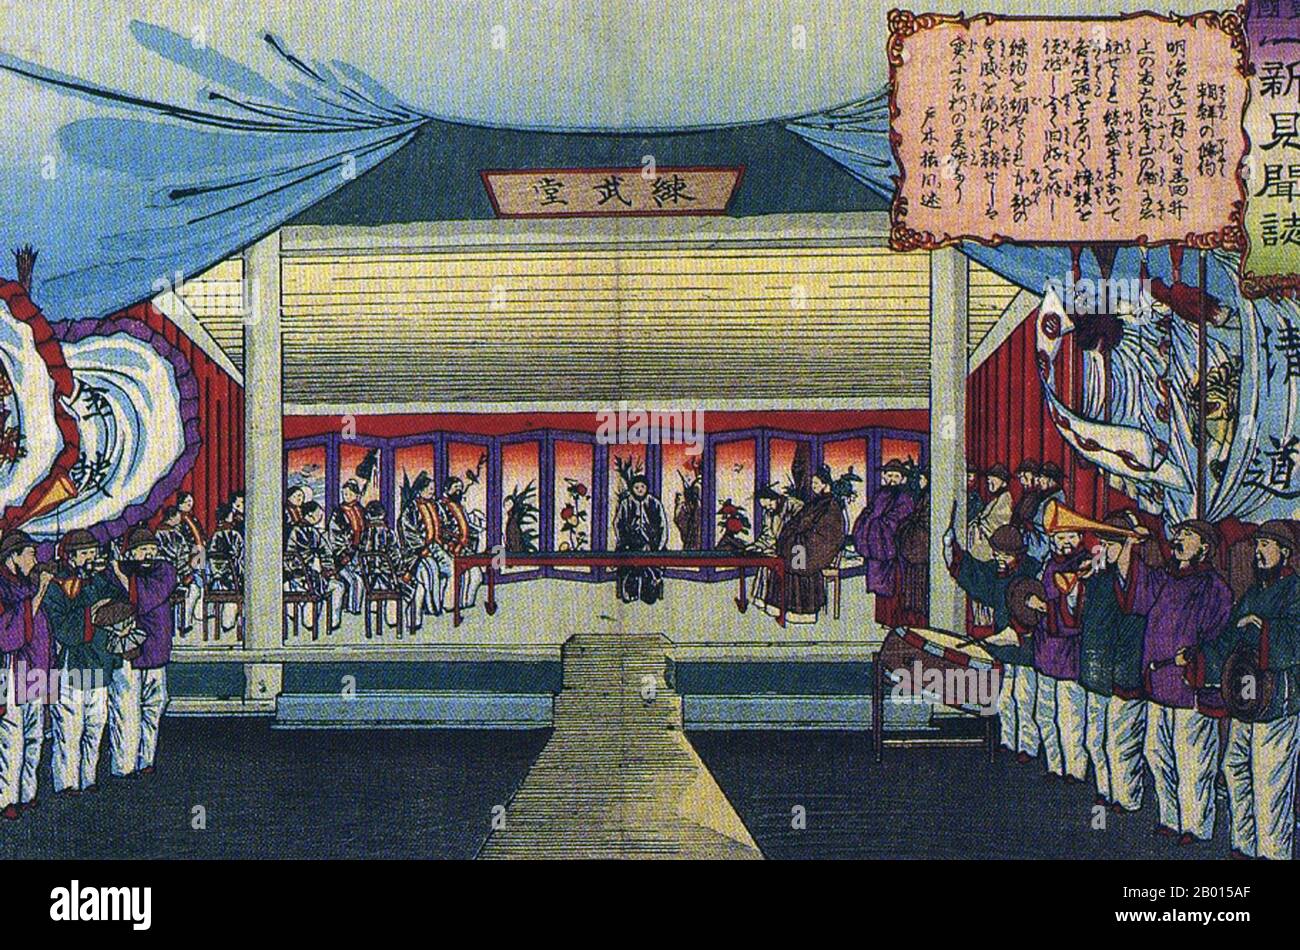 Japan/Korea: Signing of the Japan-Korea Treaty of Amity, Ganghwa. Ukiyo-e woodblock print, 1876.  The Japan-Korea Treaty of Amity, also known as the Treaty of Ganghwa or Treaty of Kanghwa, was made between representatives of the Empire of Japan and the Kingdom of Joseon in 1876. It was an unequal treaty forced on Korea by a rapidly modernising Japan that was eager to become a colonising power in Eastern Asia. When the negotiations were concluded, the ports of Busan, Inchon and Wuson were opened for trade. Japan employed gunboat diplomacy to press the Joseon Dynasty to sign this unequal treaty. Stock Photo